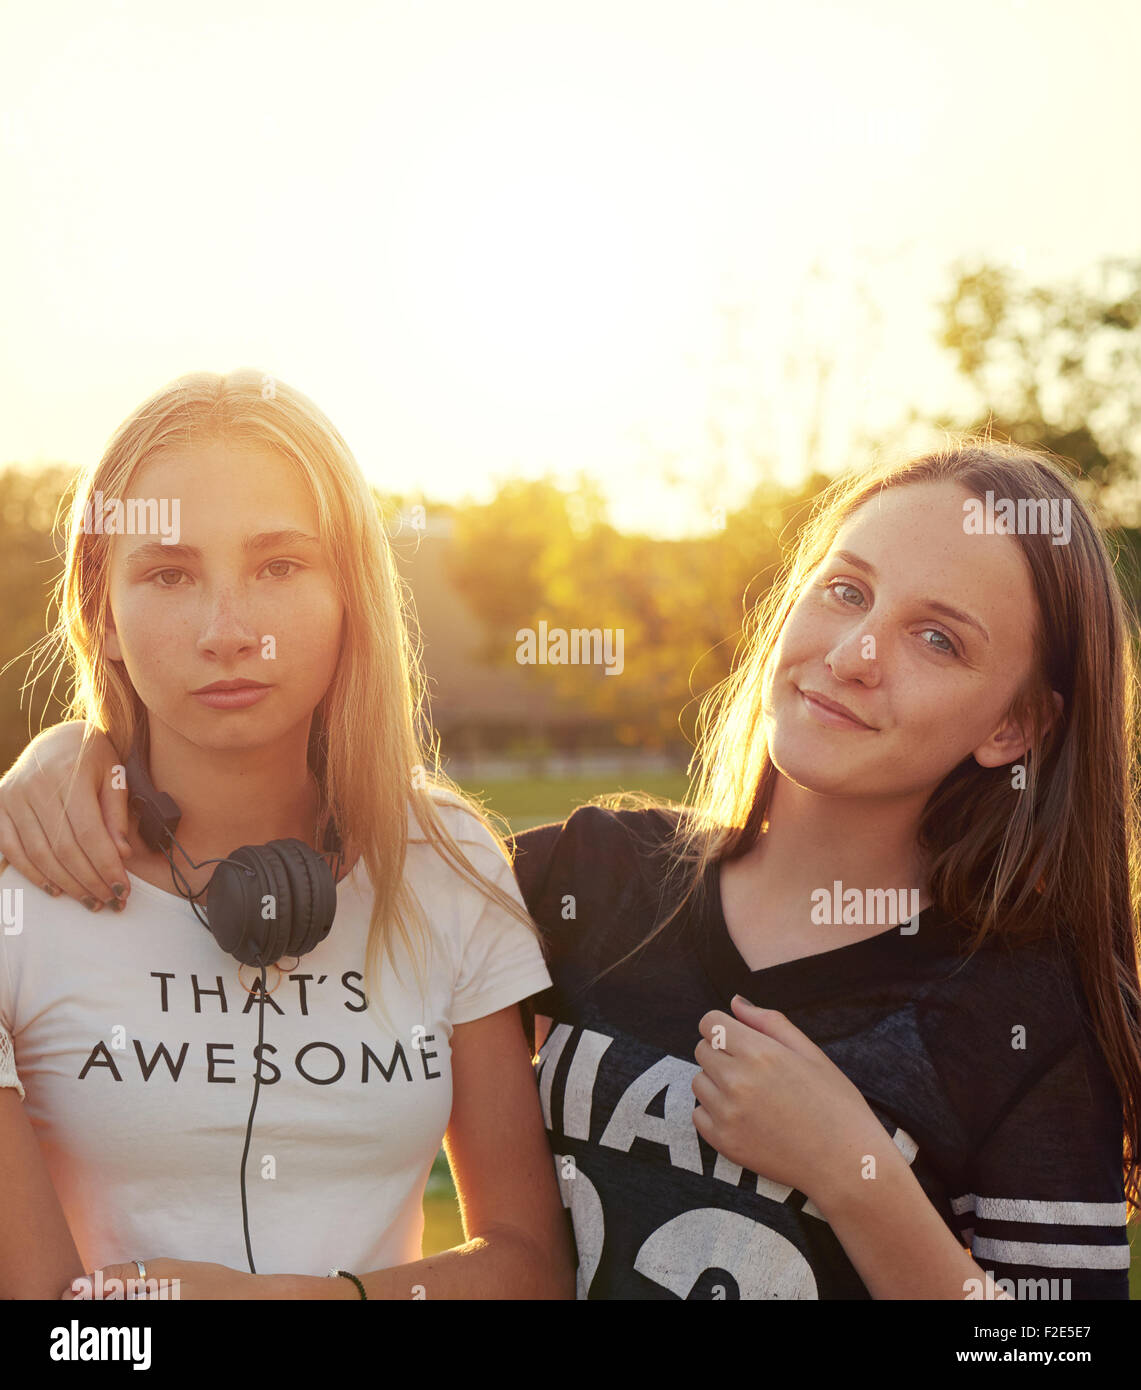 Two teenage girls outside a summer evening Stock Photo